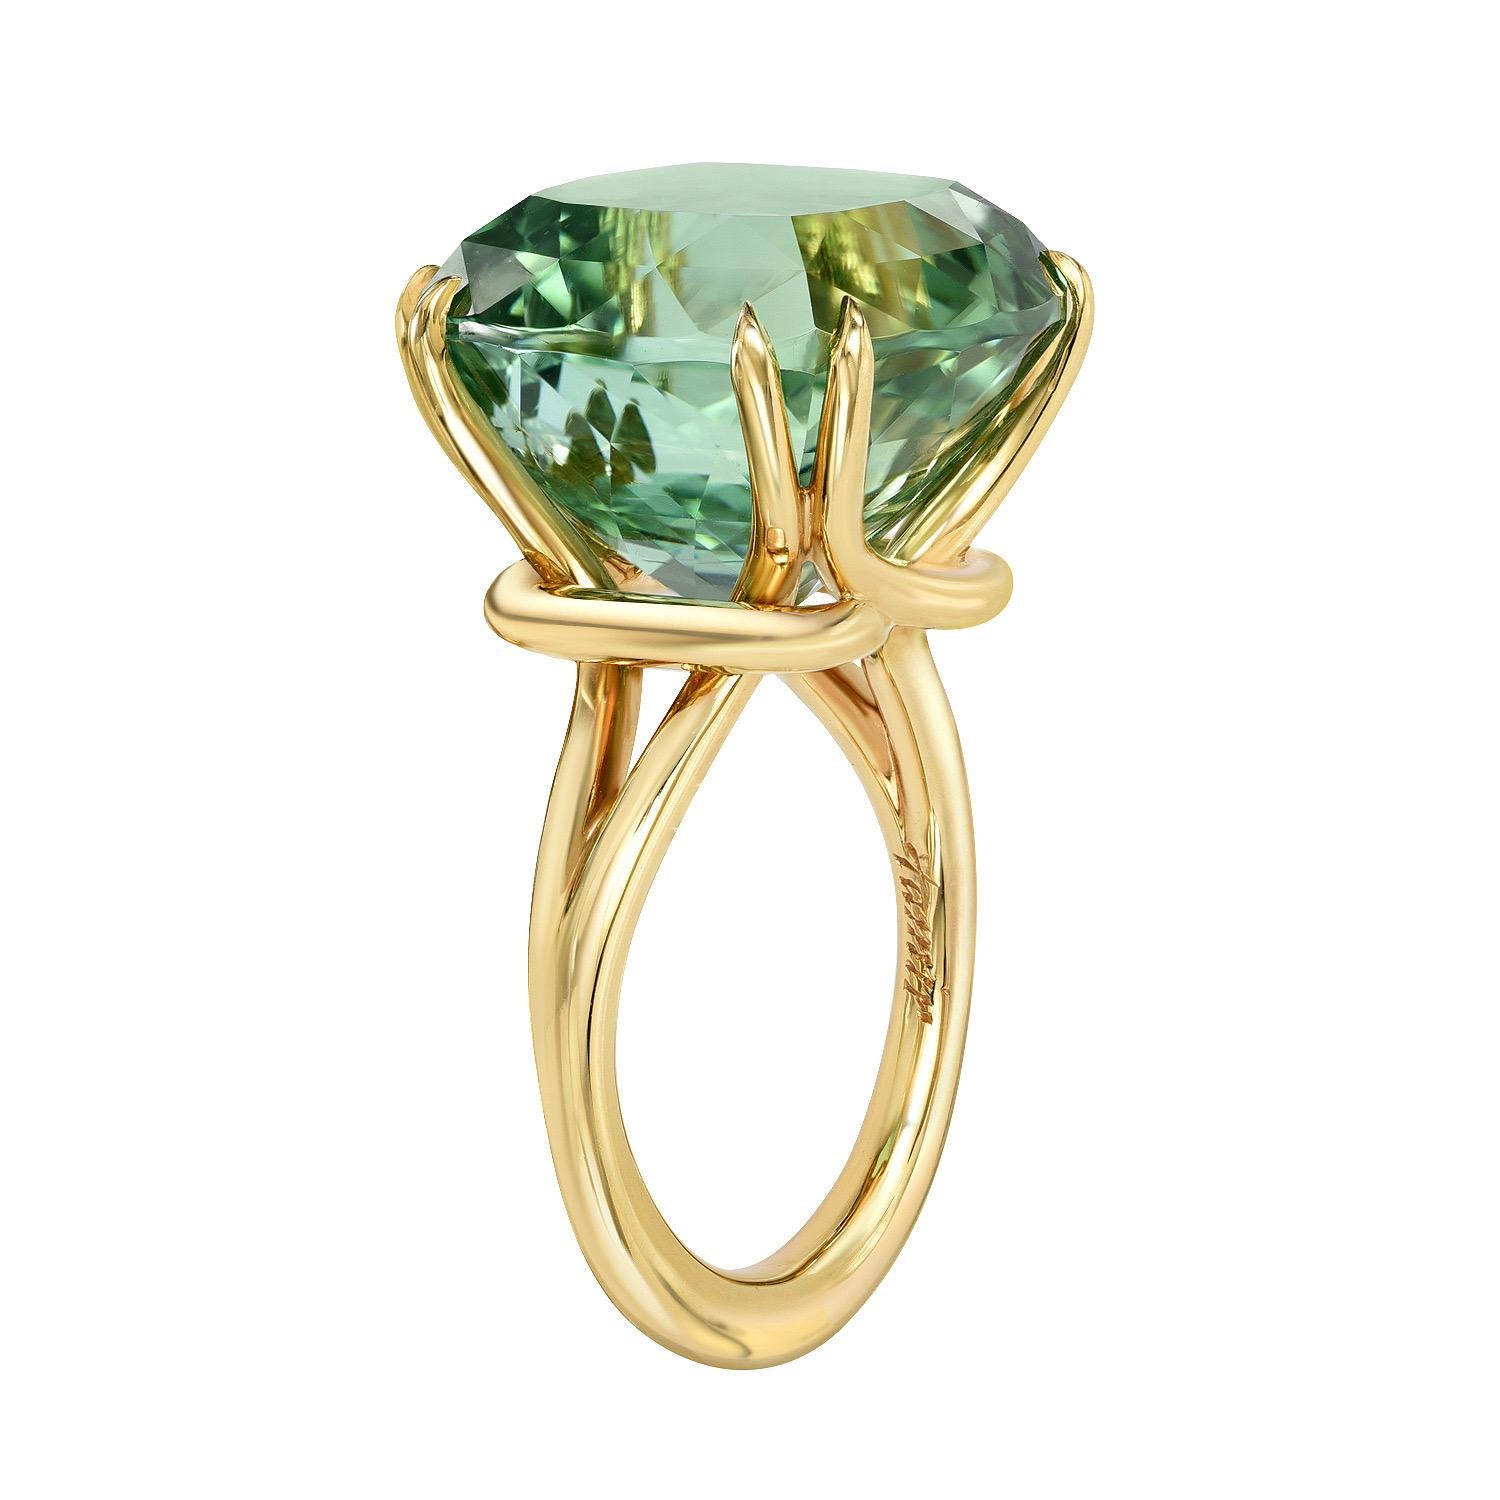 Incredible 18.04 carat cushion-cut Mint Green Tourmaline, showcased in a hand crafted 18K yellow gold ring.
Size 6. Re-sizing is complimentary upon request.
Returns are accepted and paid by us within 7 days of delivery.
Crafted by extremely skilled